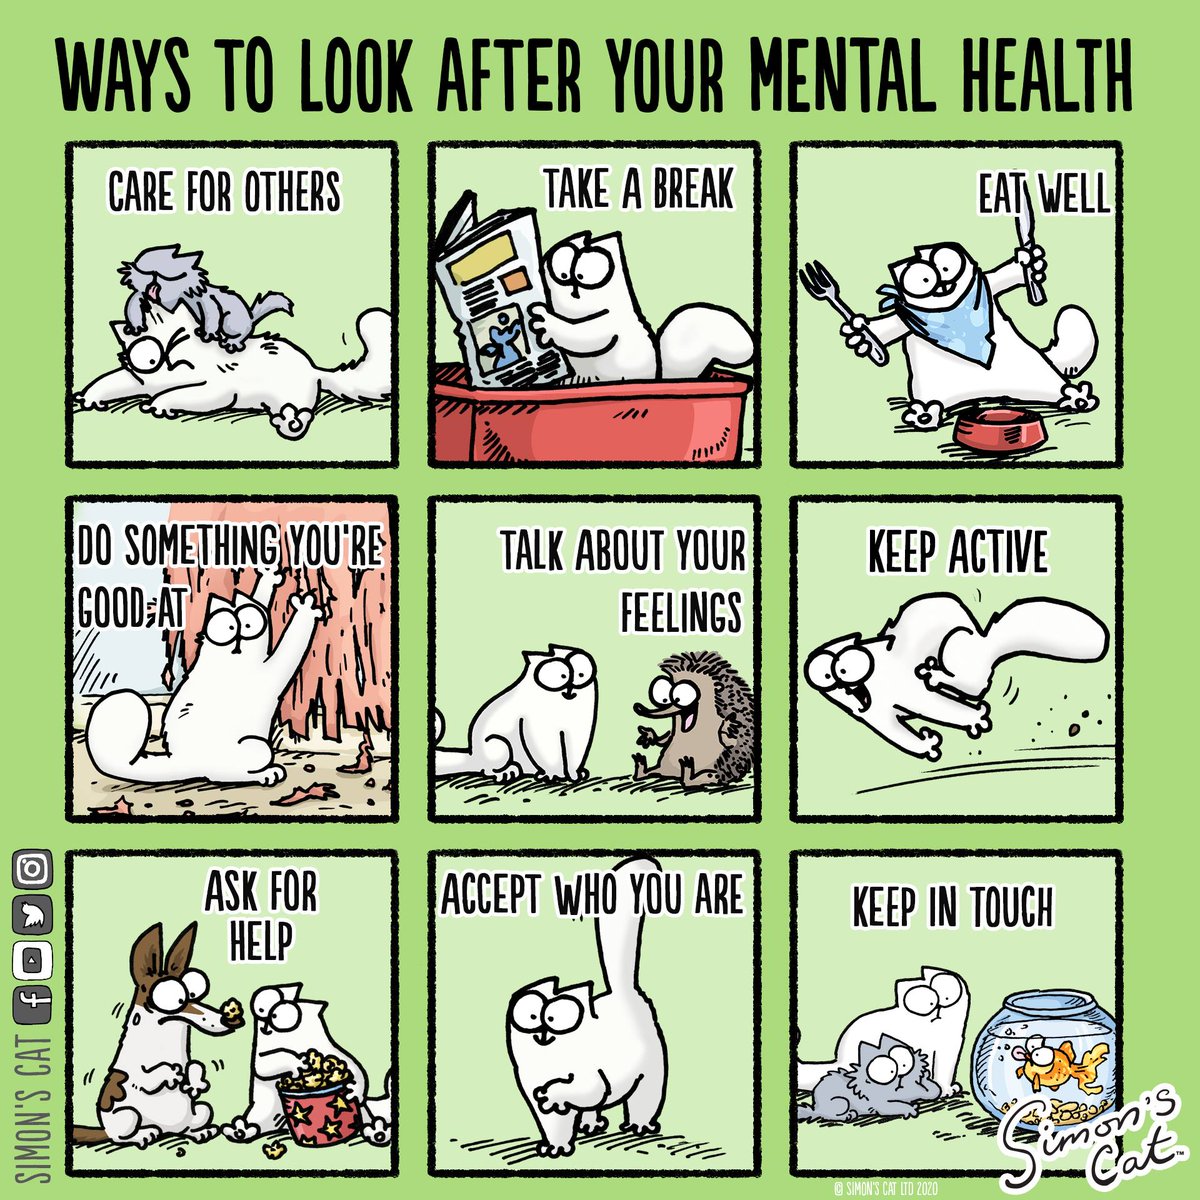 Today is #WorldMentalHealthDay and we wanted to share some tips! Share some of yours below...😊